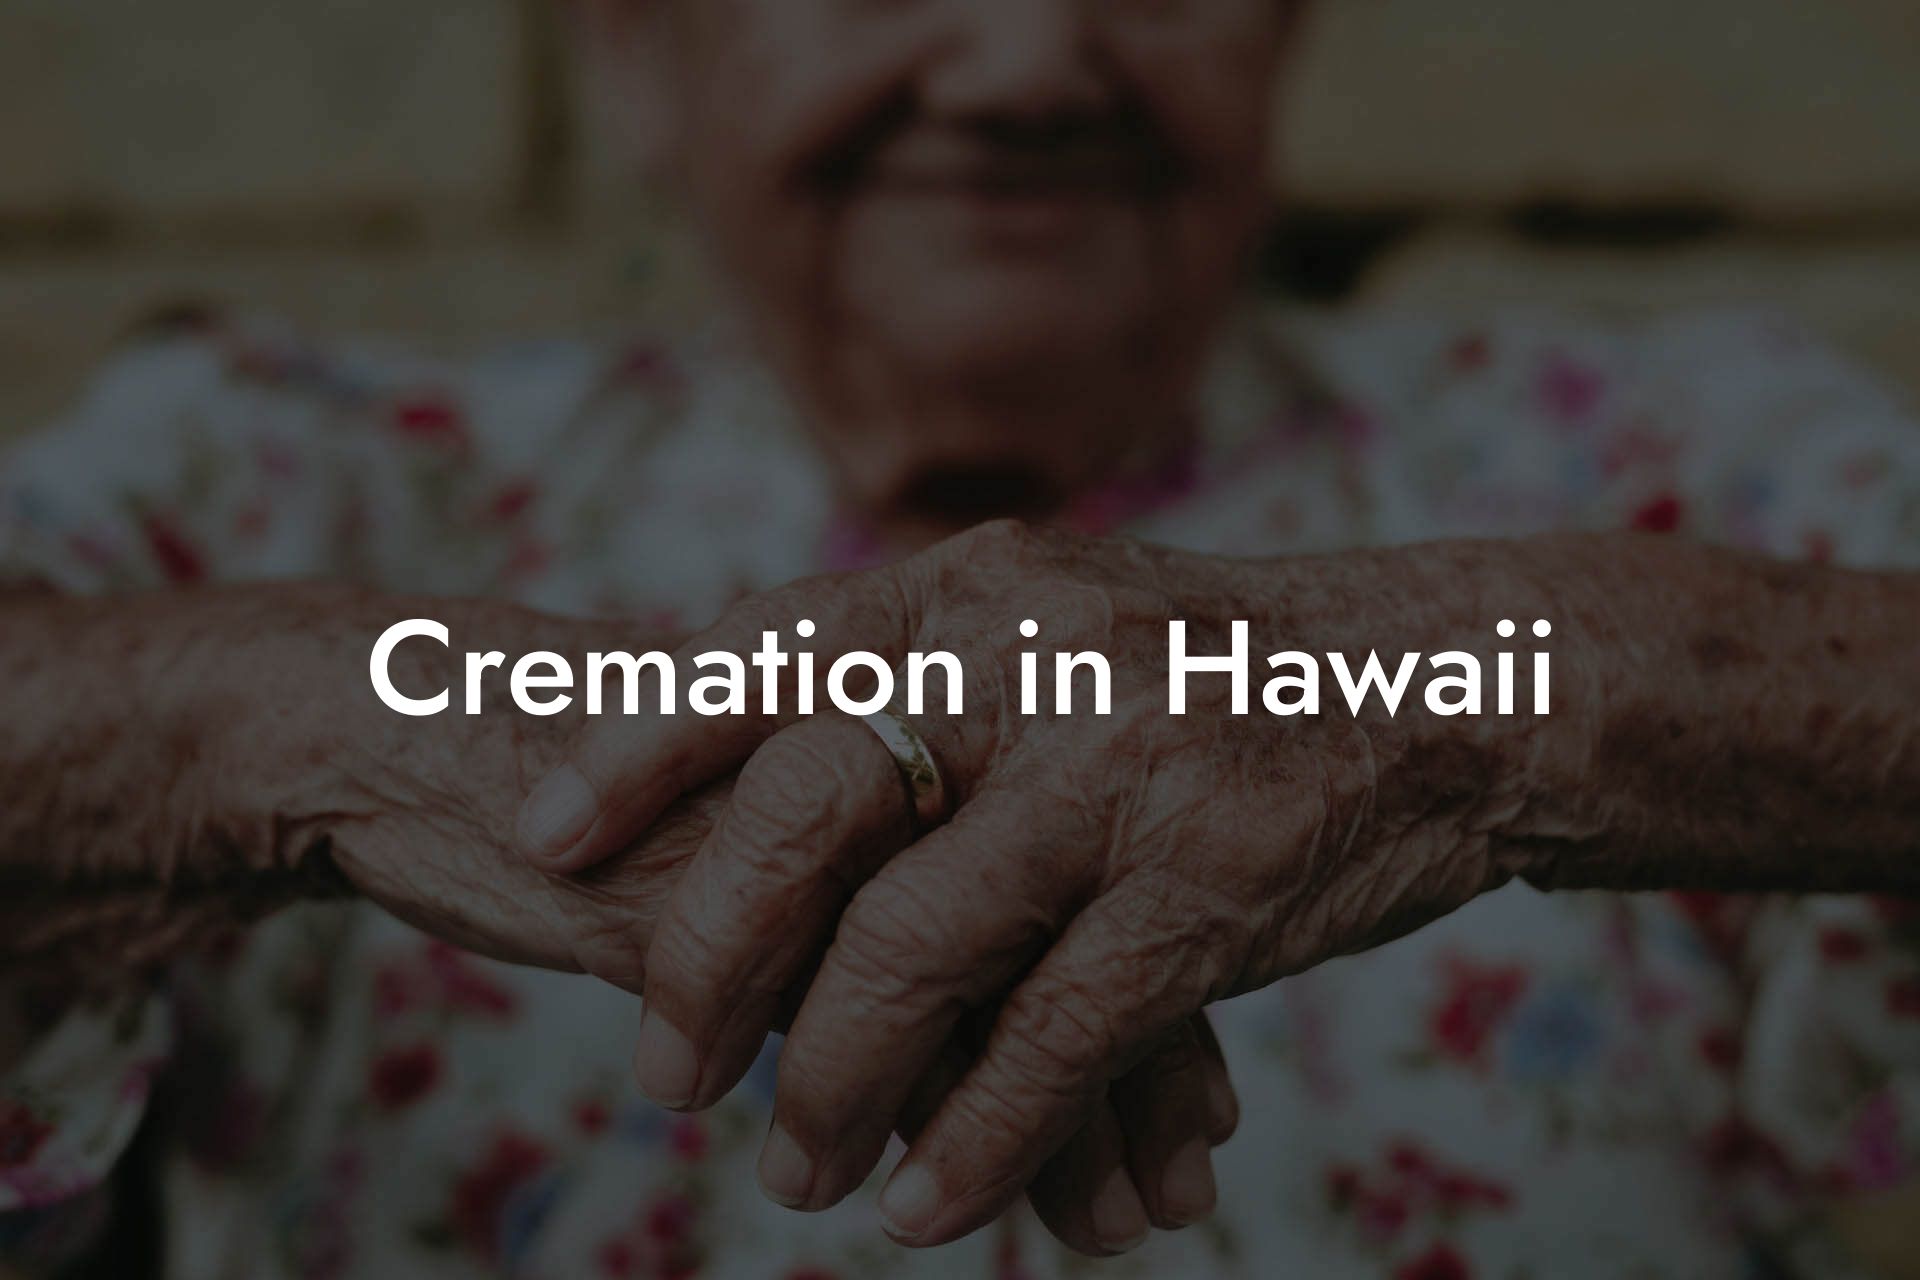 Cremation in Hawaii